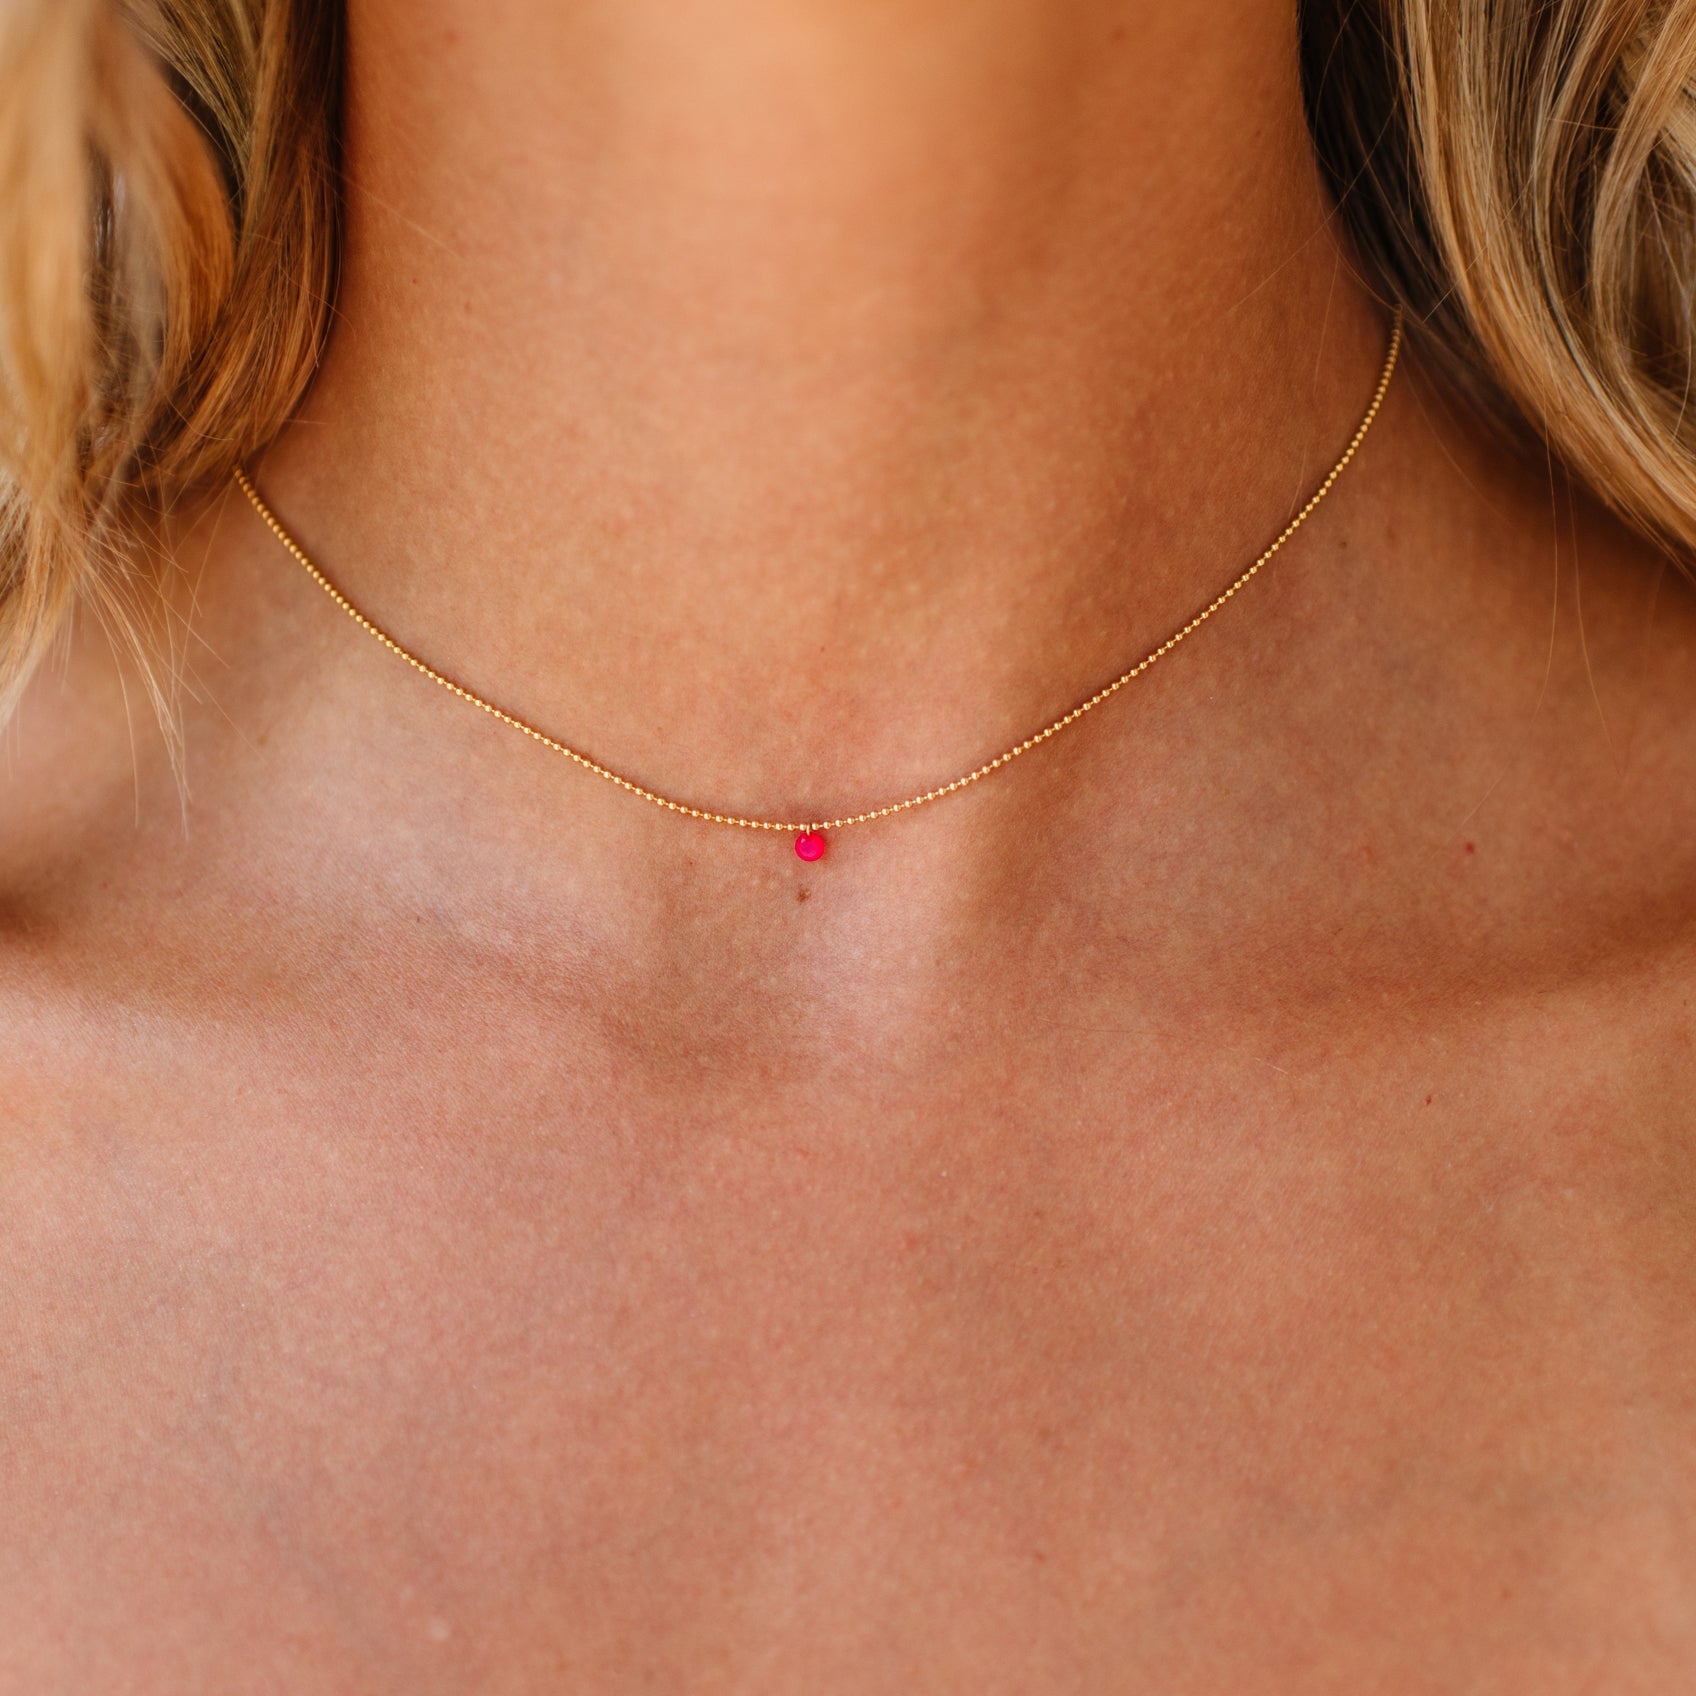 DAINTY RADIANT SOLITAIRE NECKLACE - HOT PINK CHALCEDONY & GOLD - SO PRETTY CARA COTTER